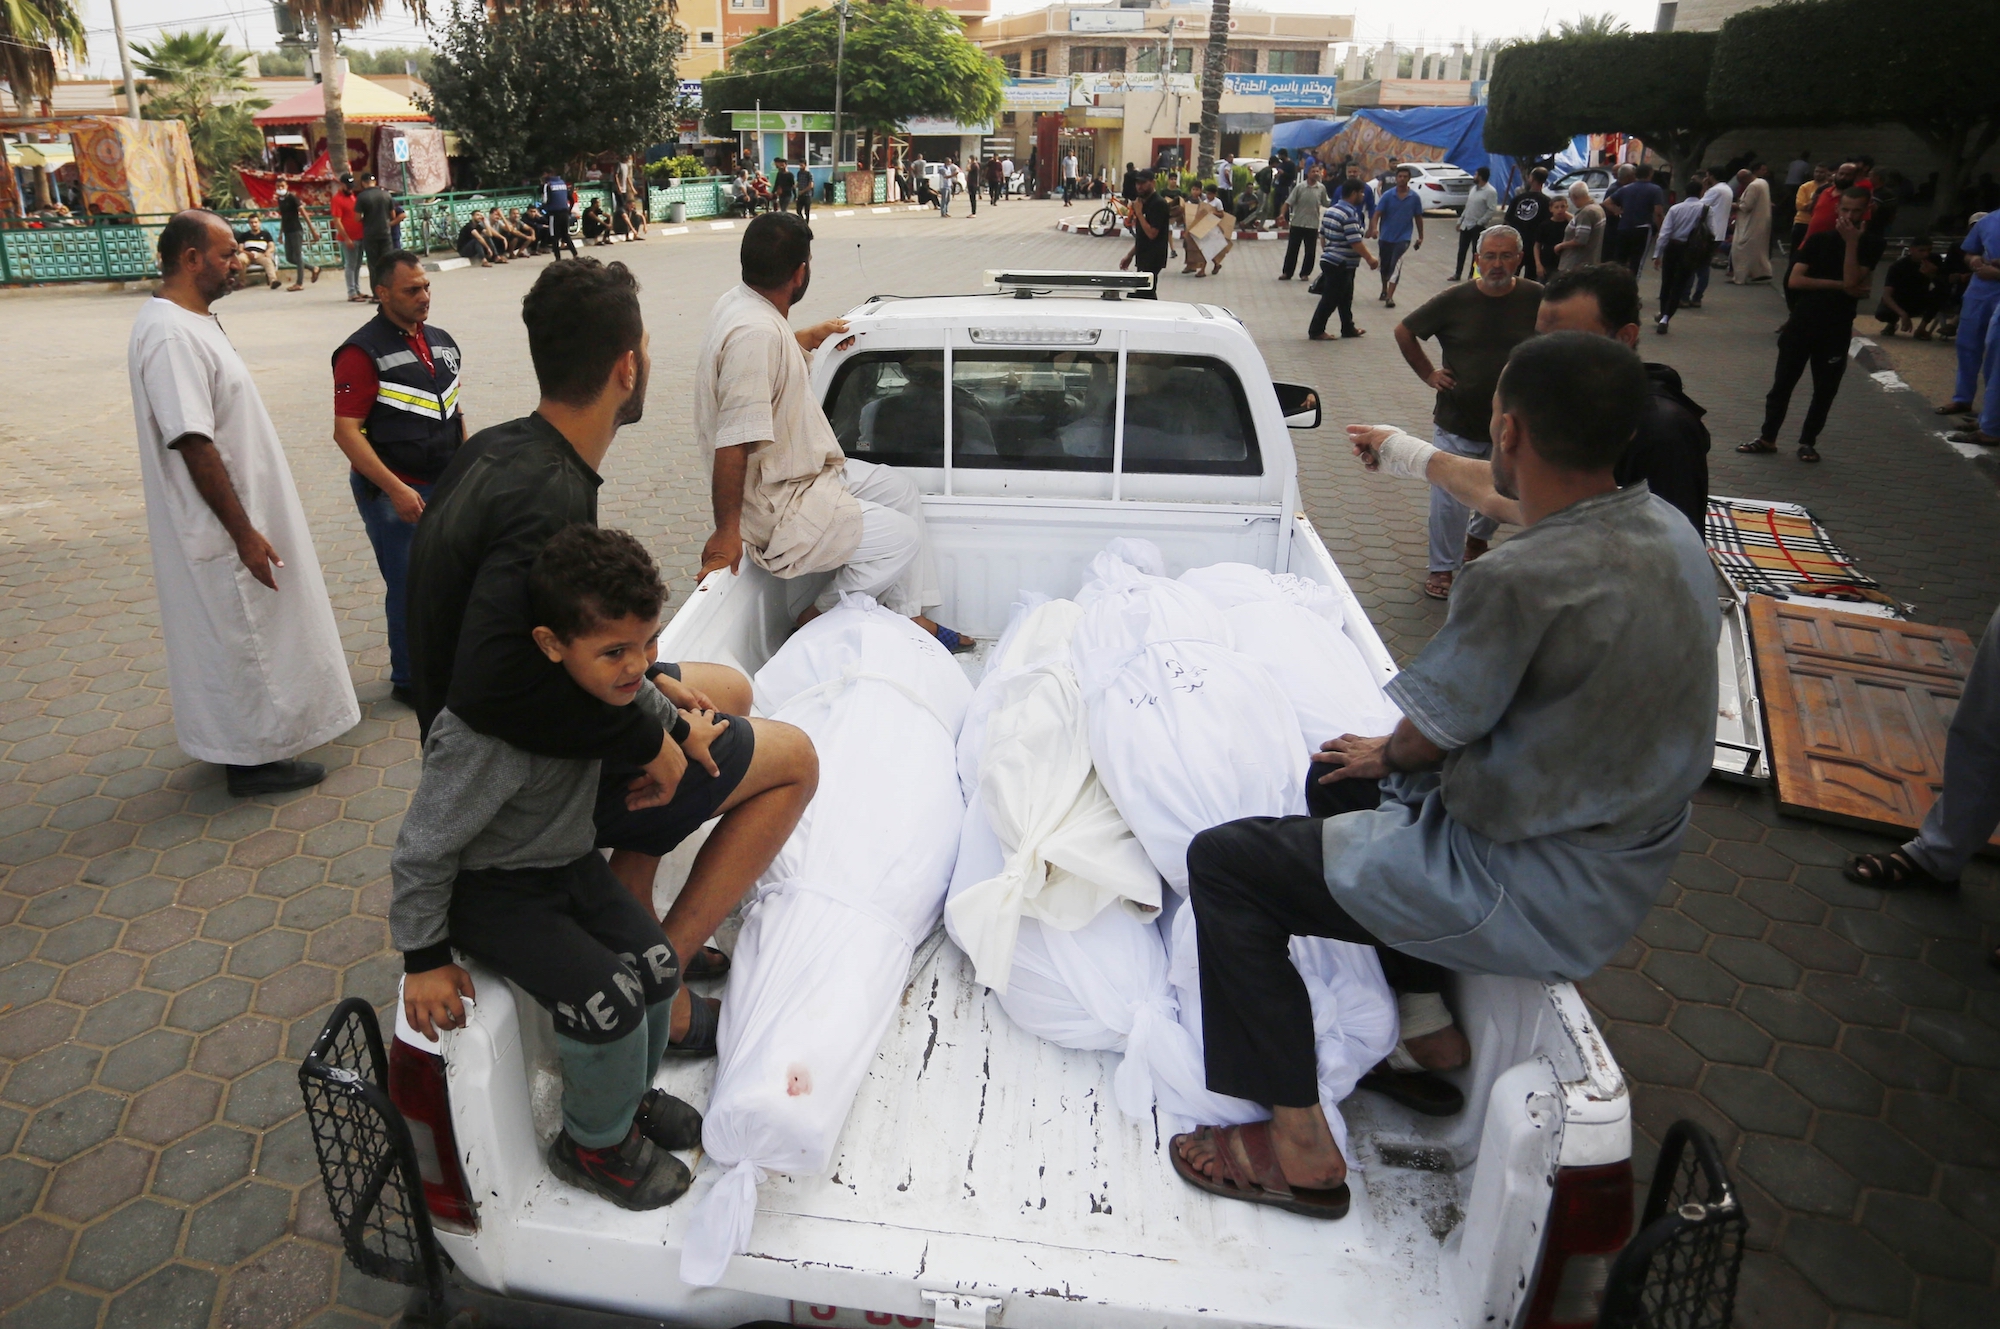 People take the bodies out of the mortuary of Al Aqsa Martyrs Hospital to bury them in Deir al-Balah, Gaza, on Saturday.